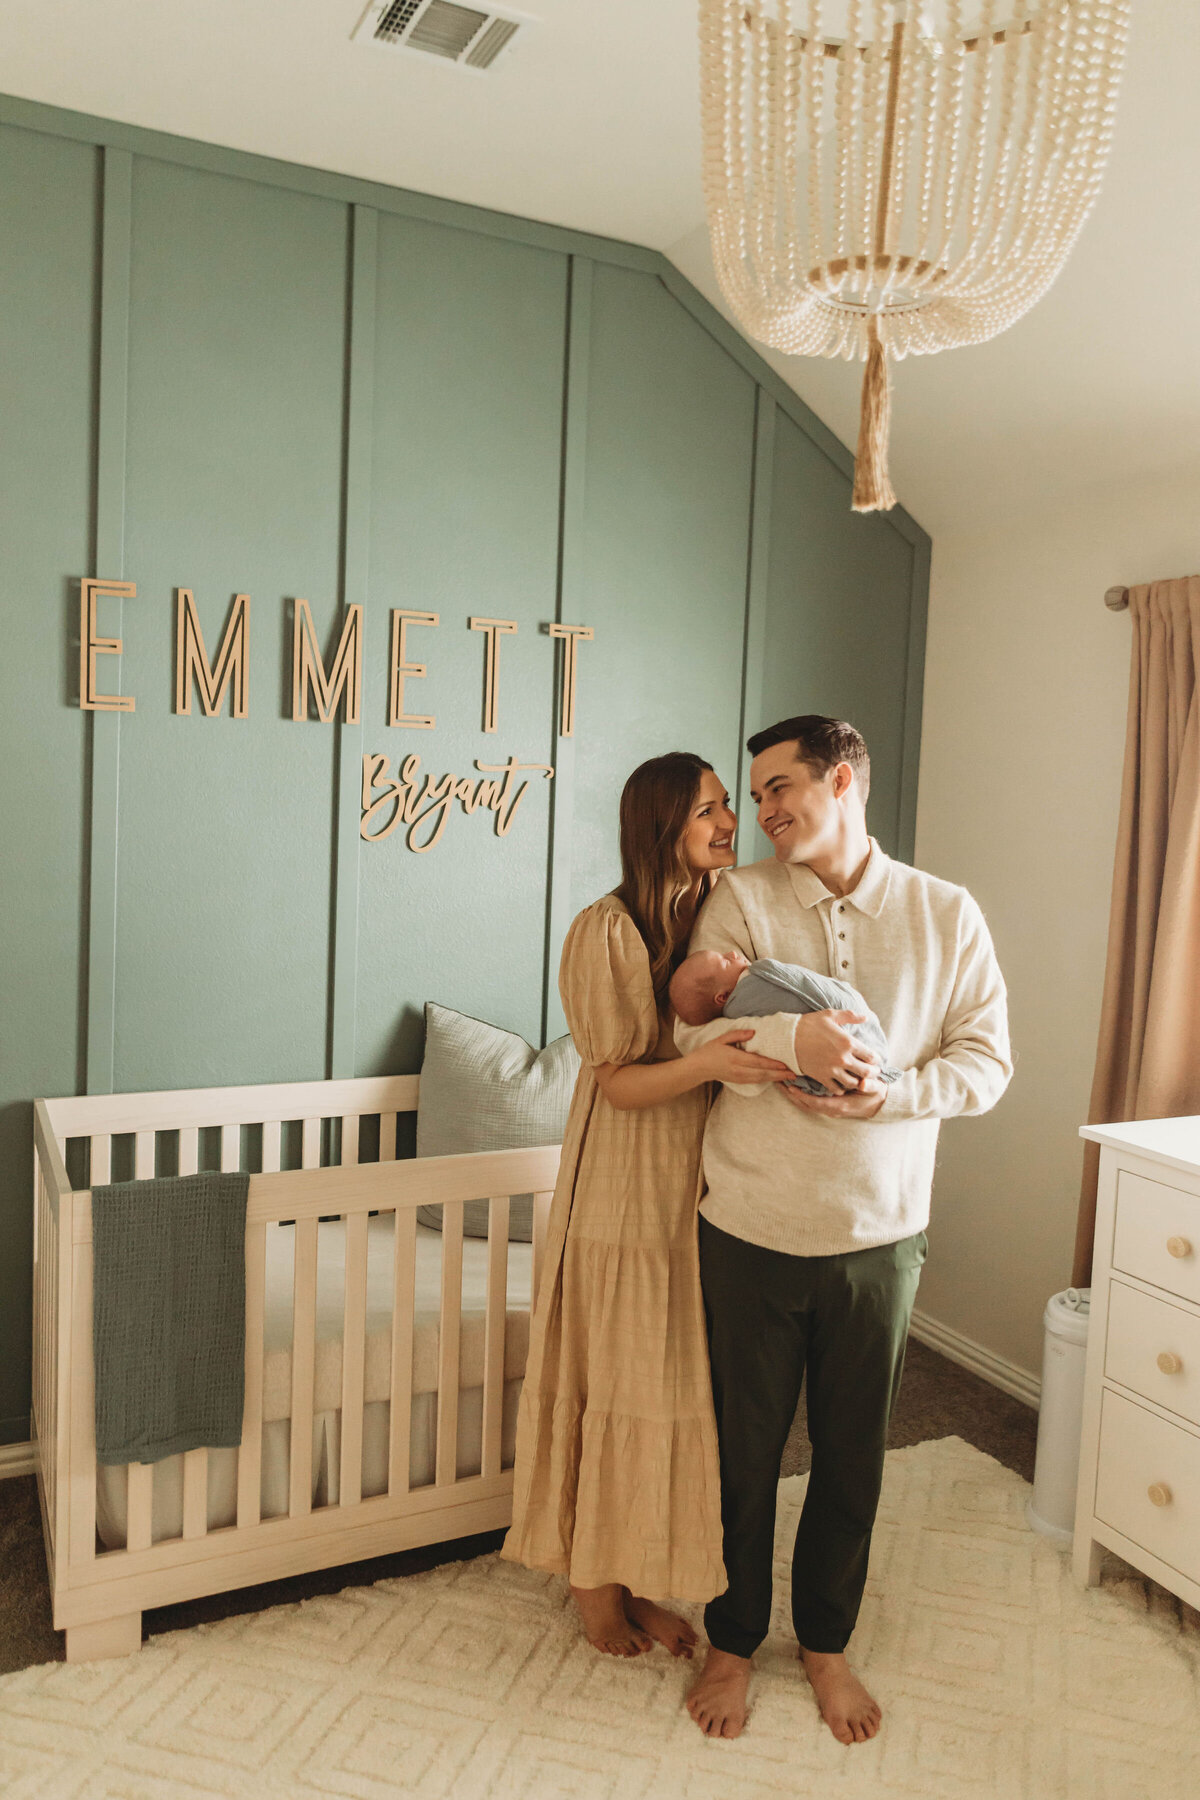 Proud parents holding their newborn baby in his cute nursery.